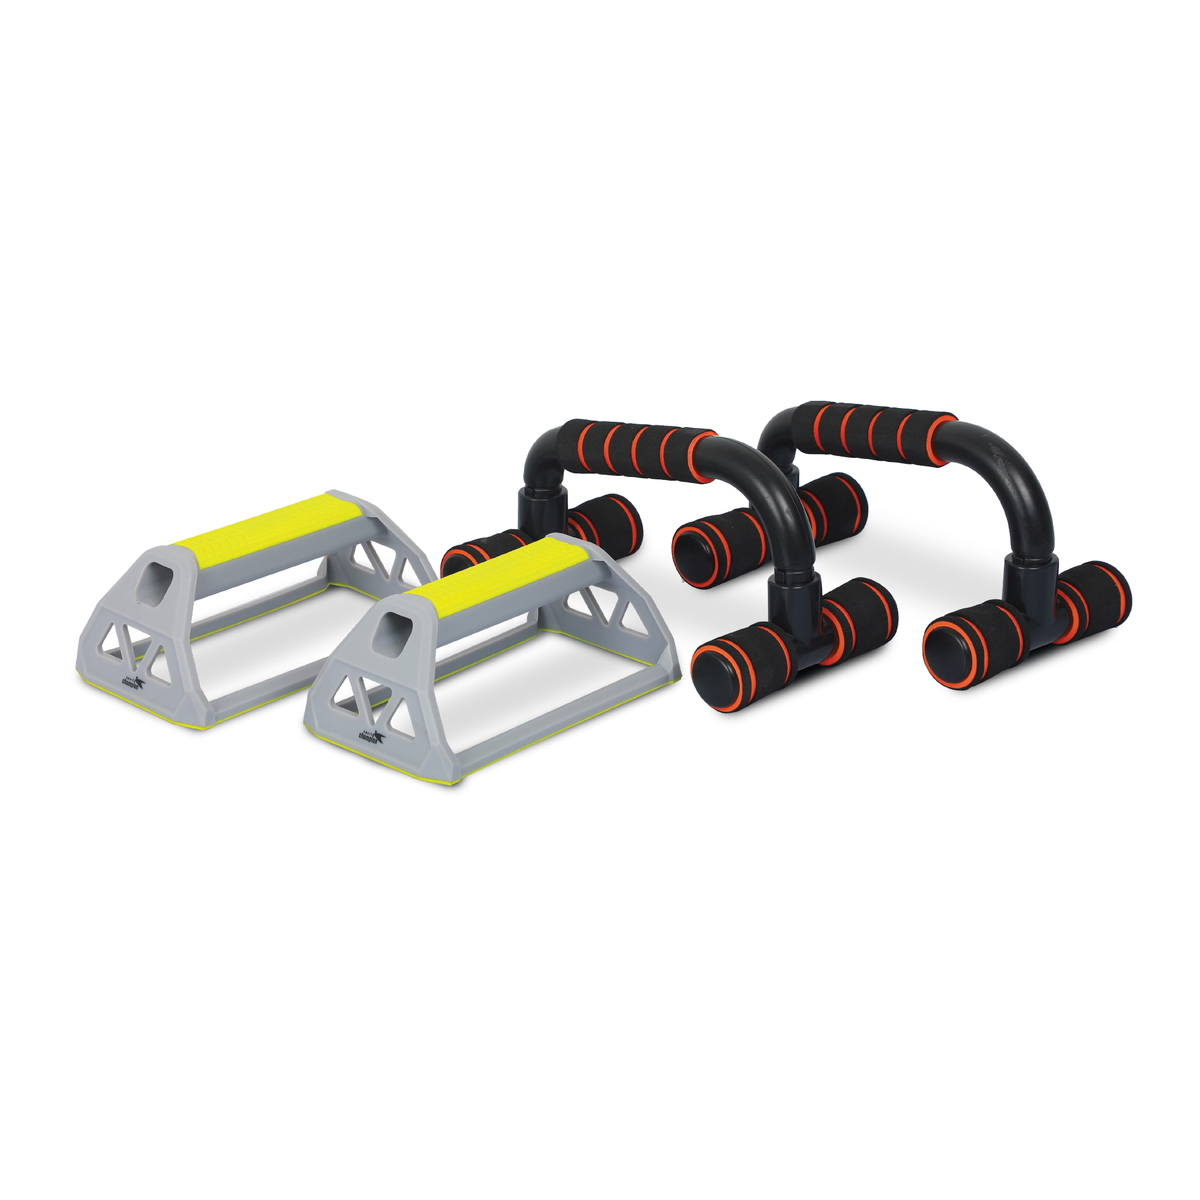 Sports Champion Push Up Bar IS9424  Assorted 1set